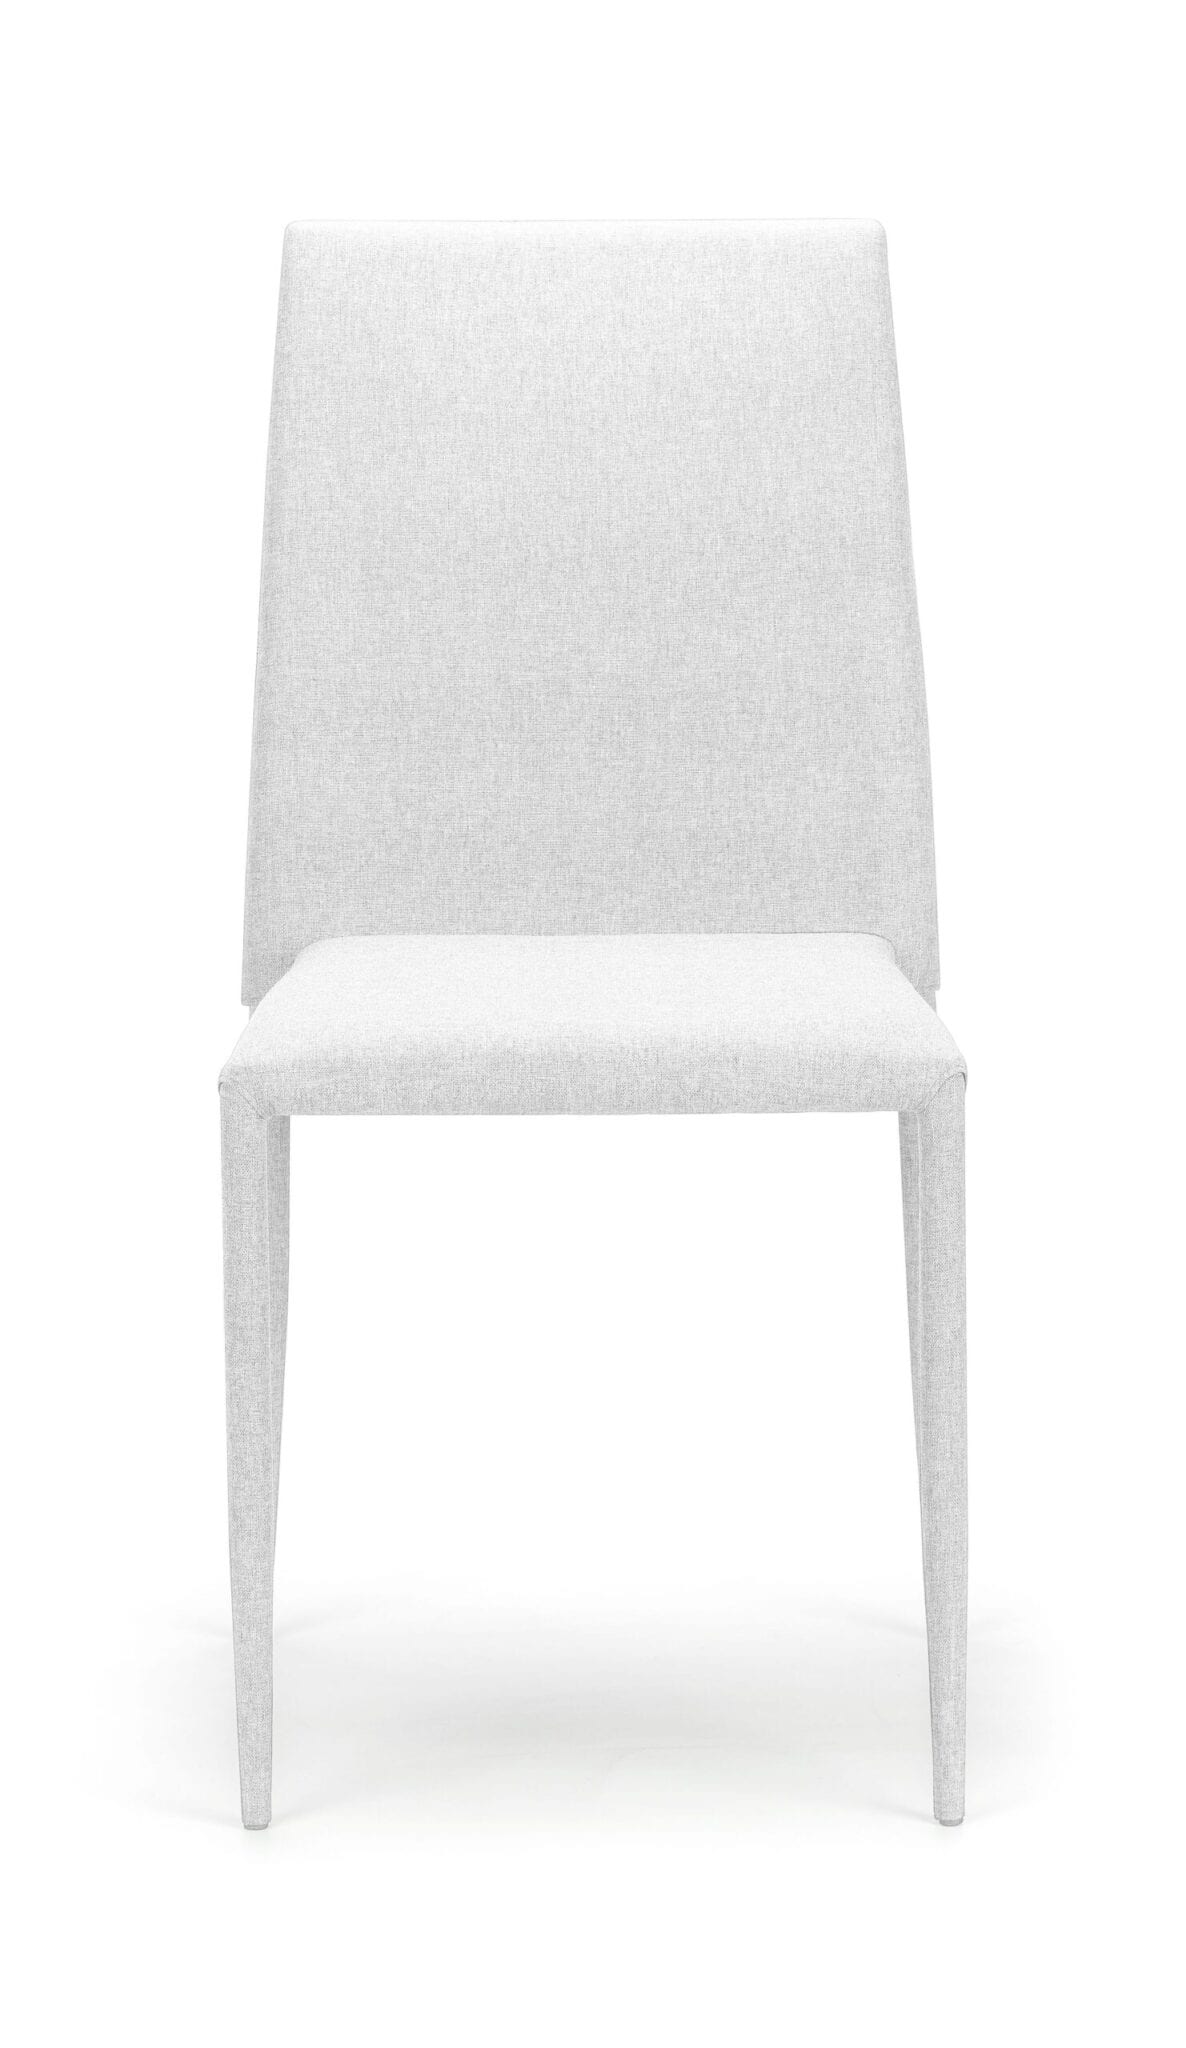 Wizz Stacking Chair White